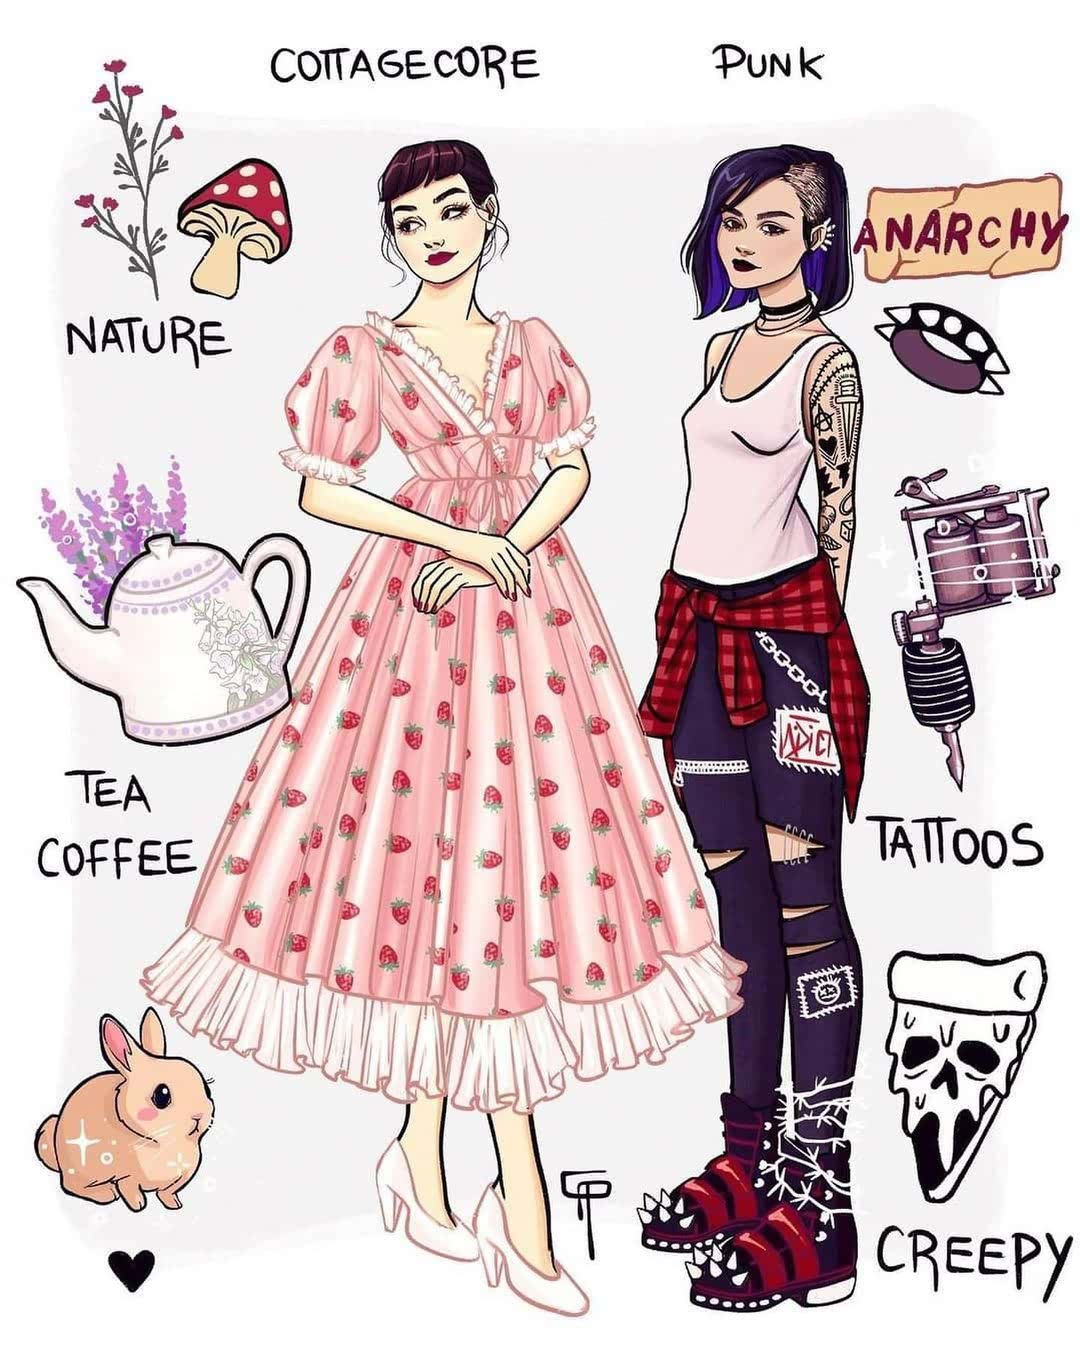 cottage core and punk Top 20 Fashion Trends to Look Forward To for 2023